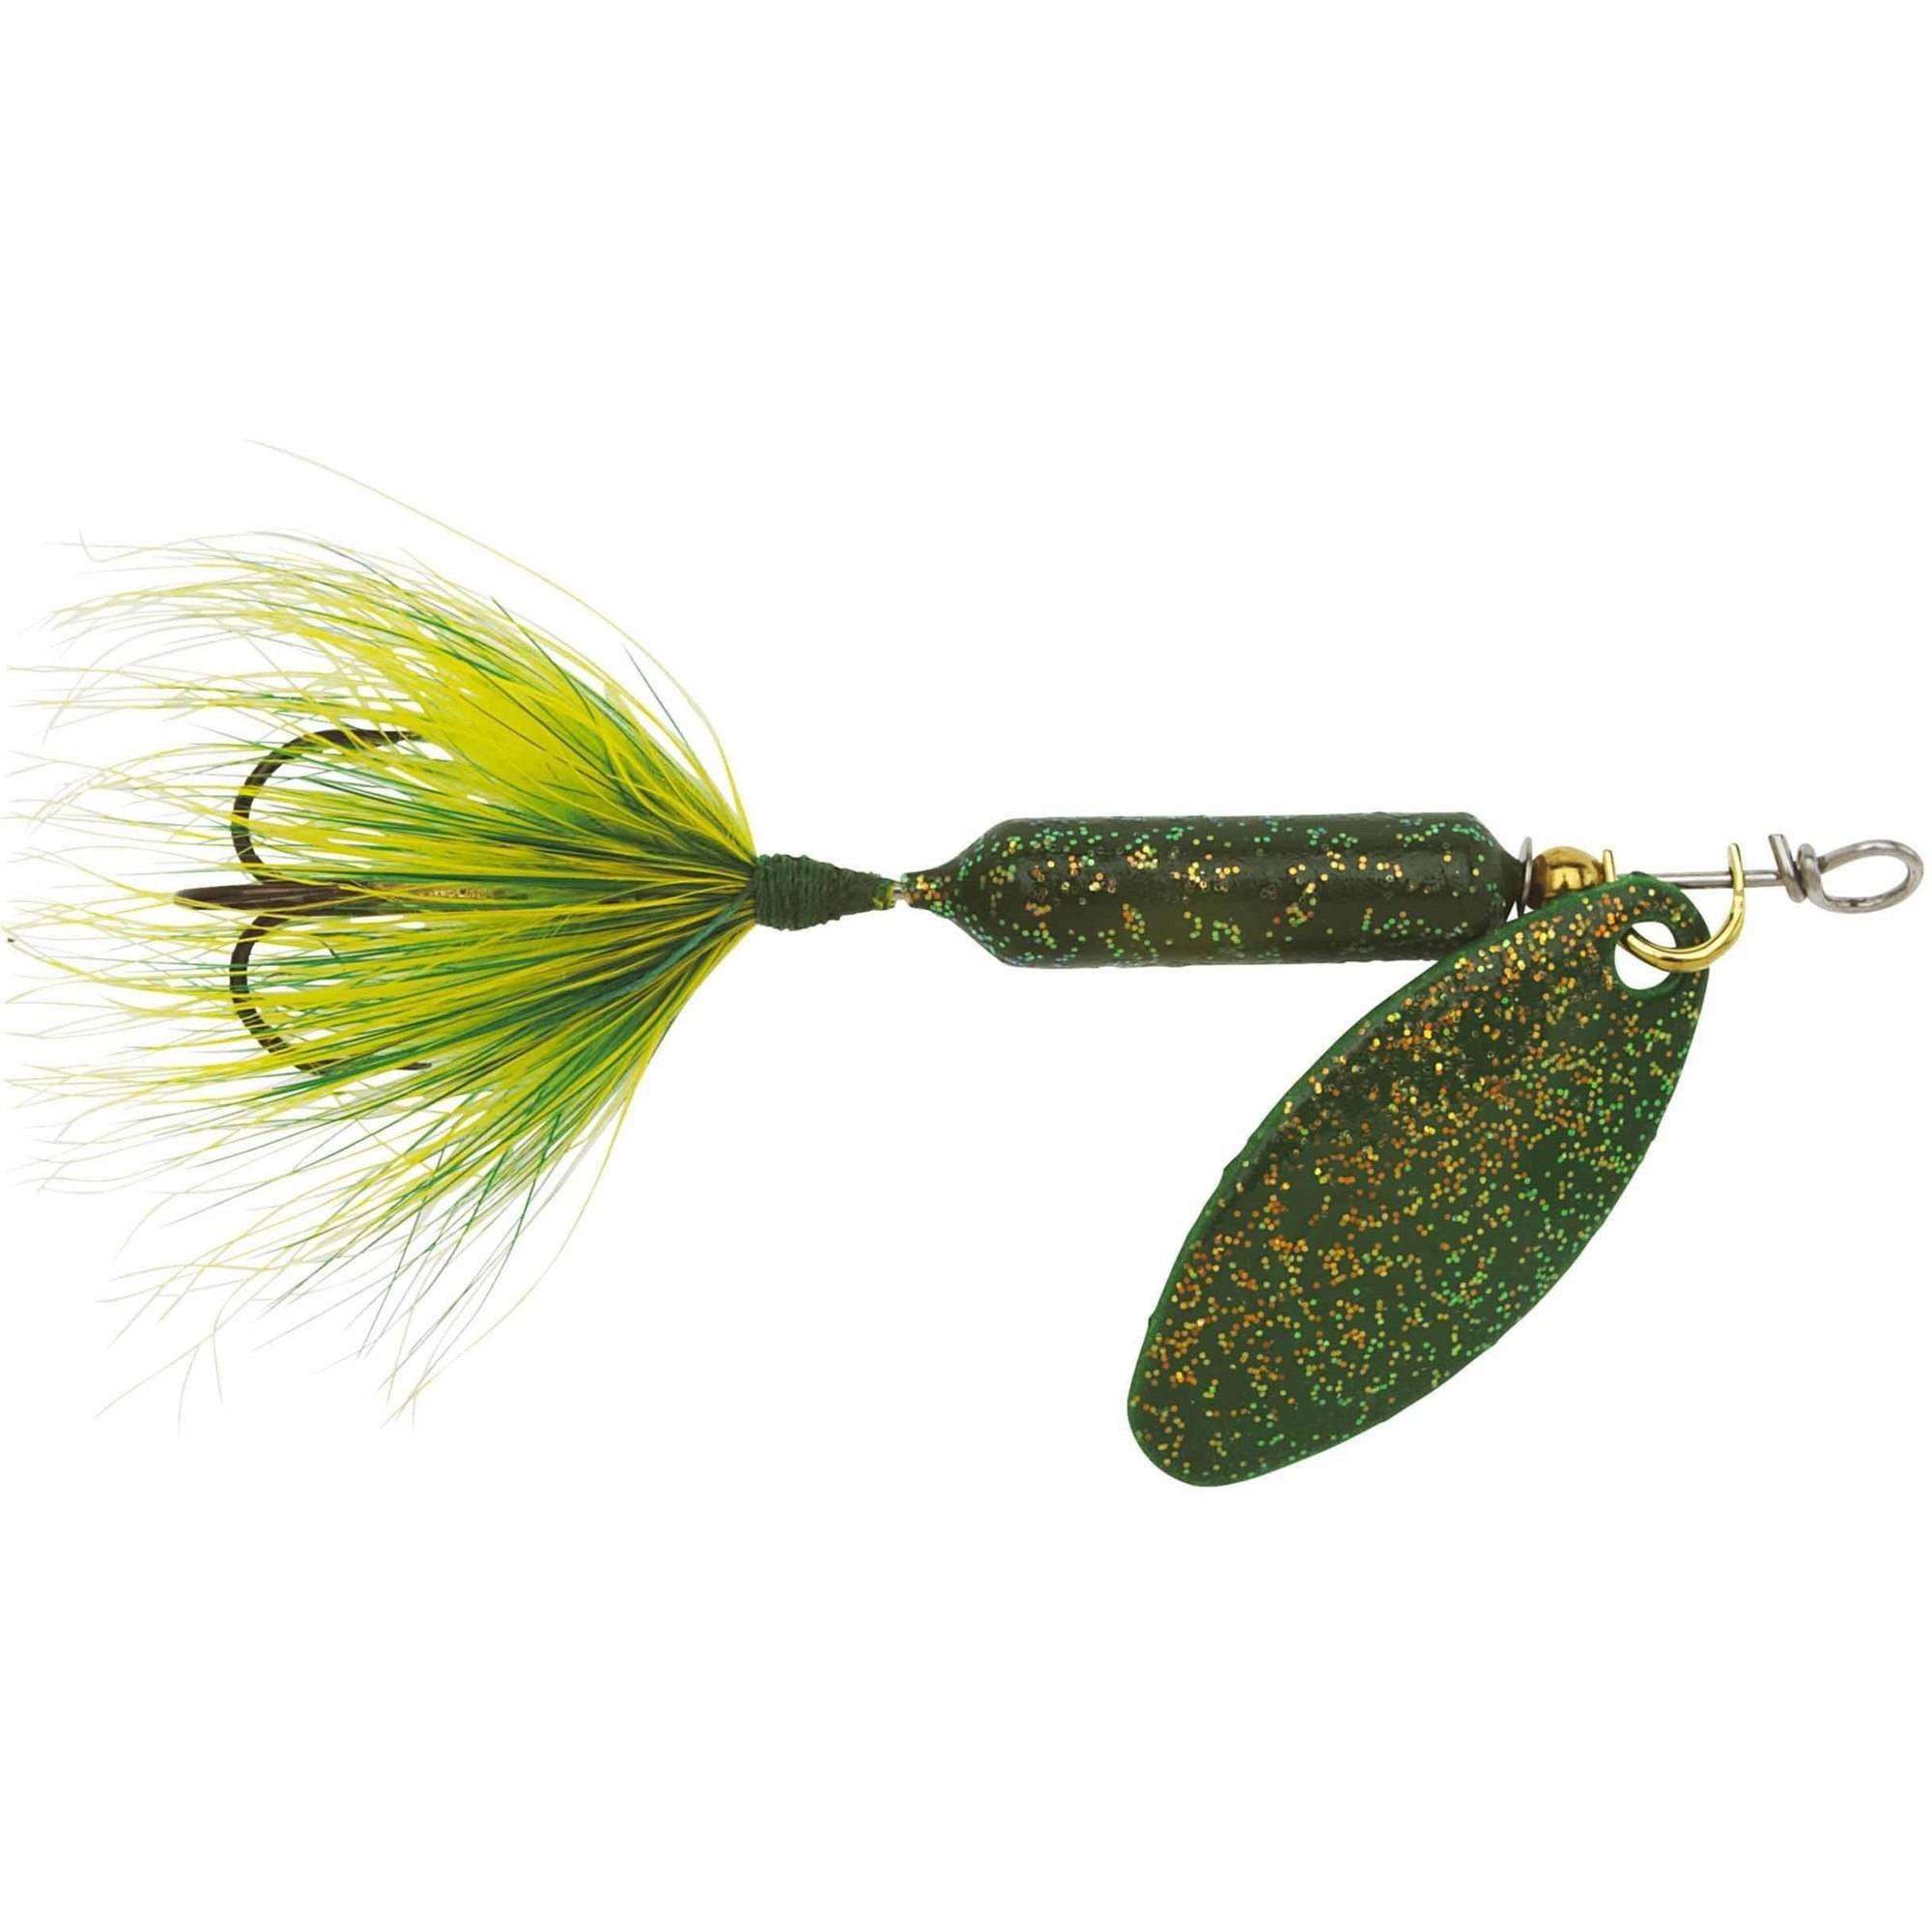  Yakima Bait Wordens 206-GRCA Rooster Tail in-Line Spinner